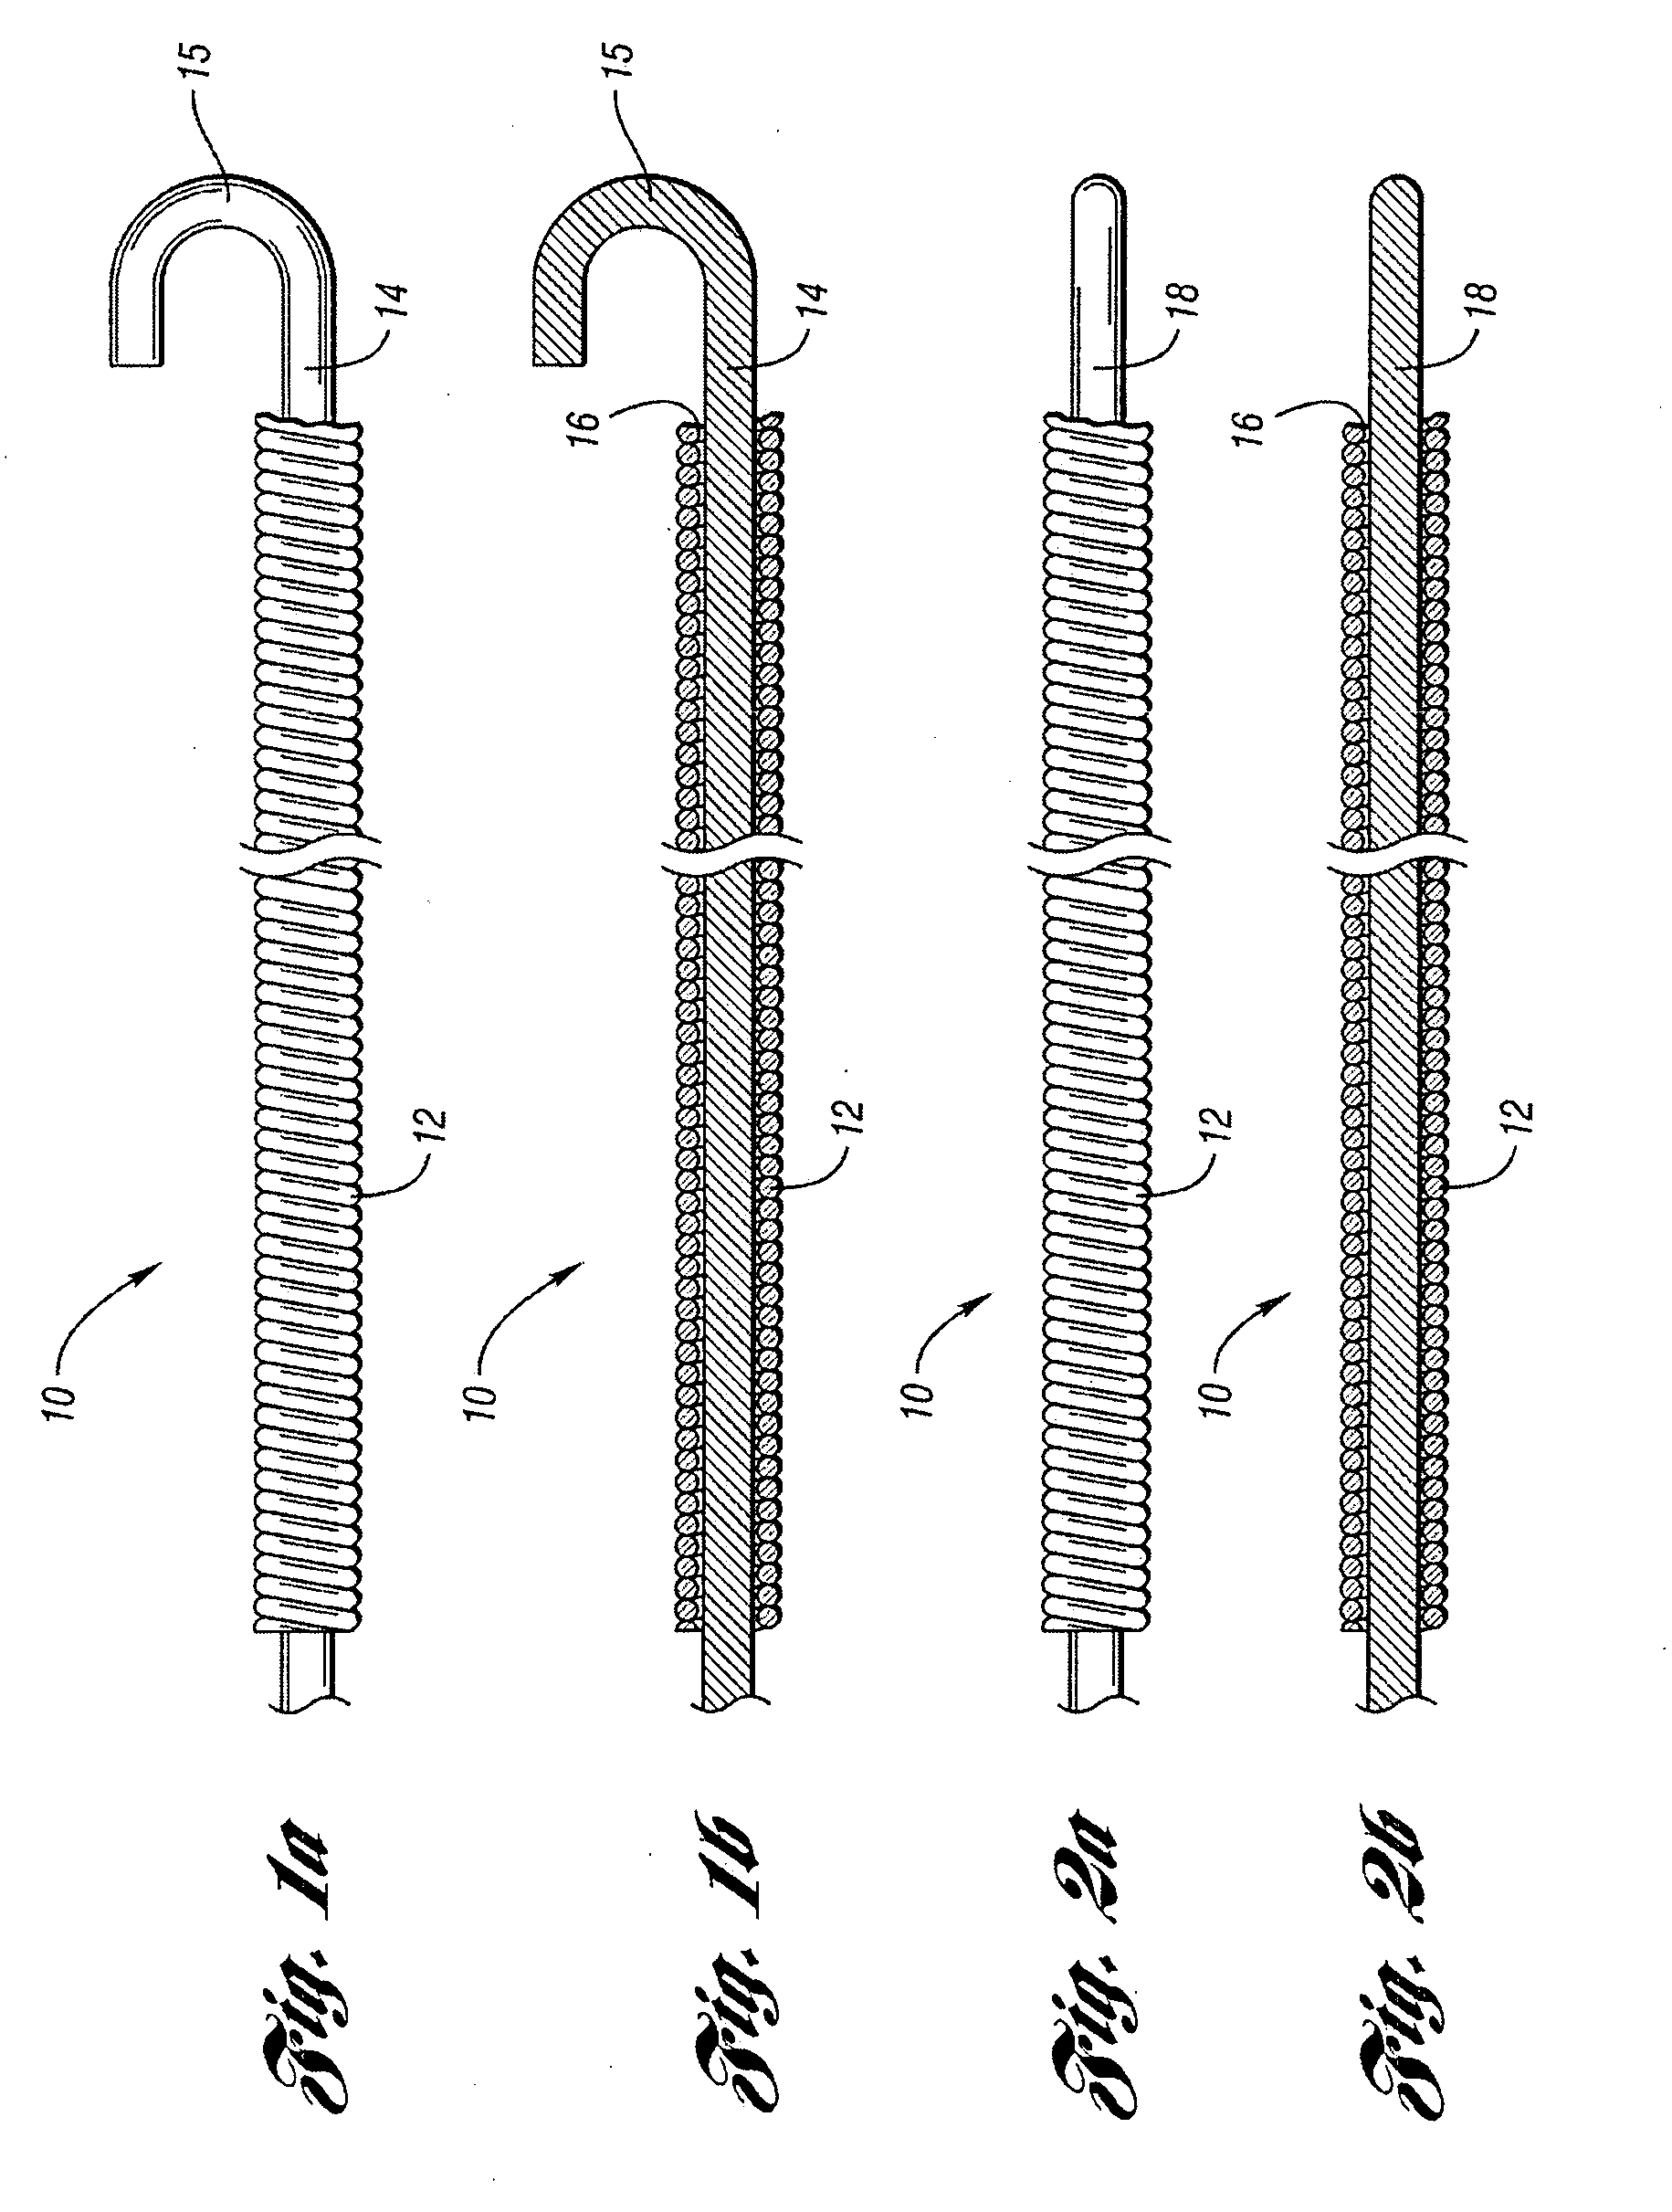 Occluding device for occlusion of a body vessel and method for making the same